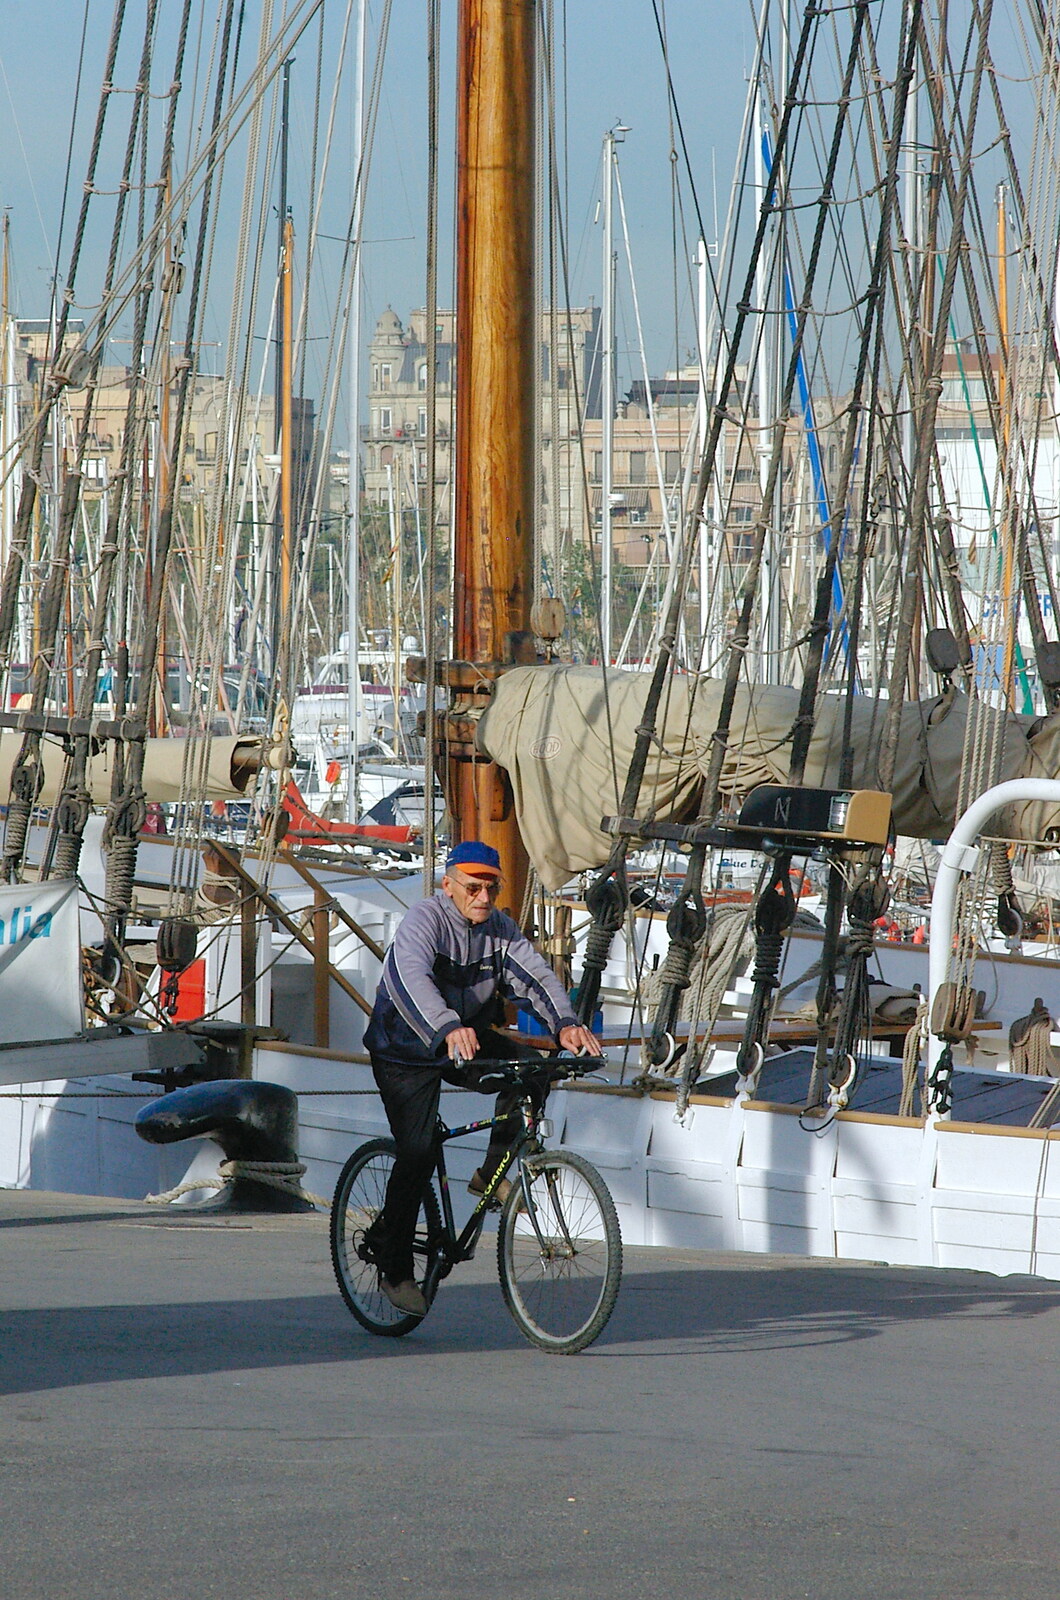 A bloke on a bike down by the harbour from A Trip to Barcelona, Catalunya, Spain - 29th April 2005